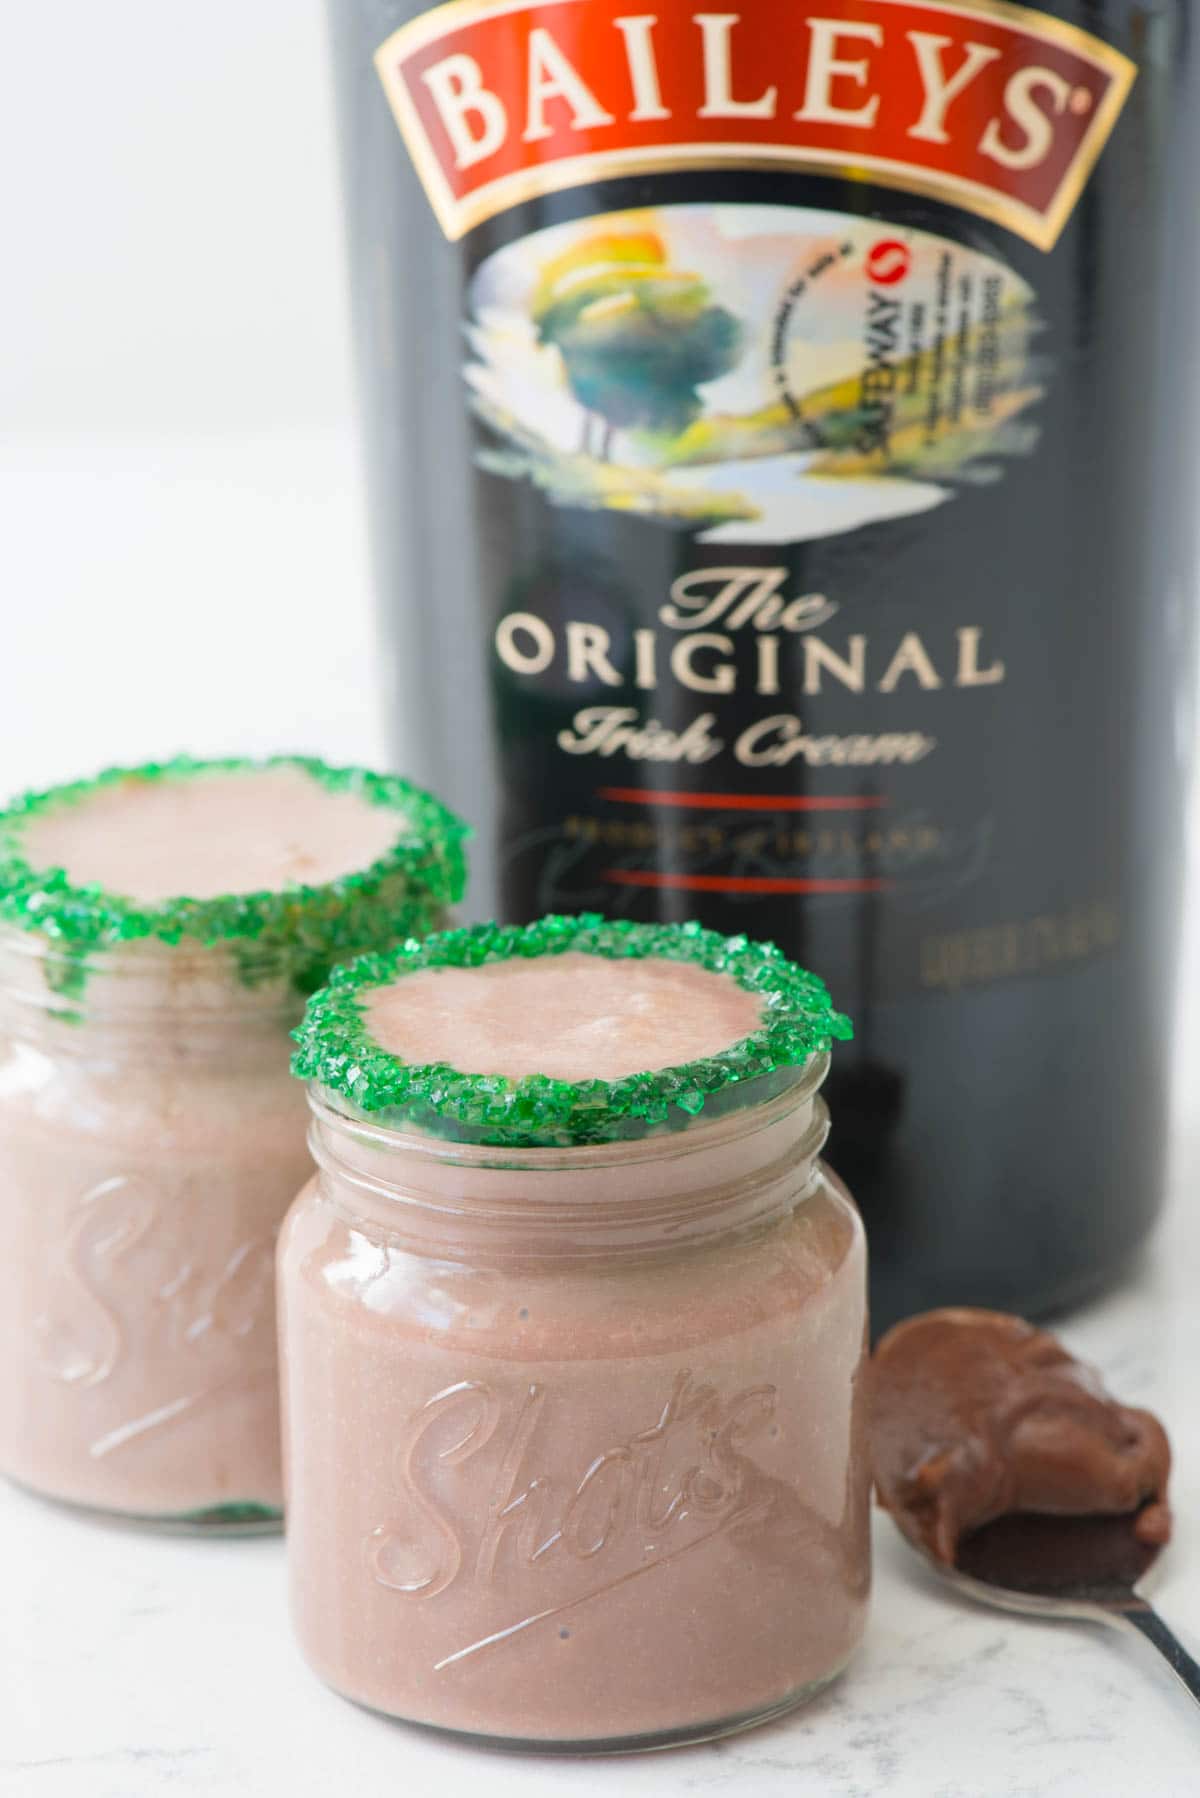 Baileys Pudding Shots - these easy three ingredient cocktails are perfect for St. Patricks Day...or any day you want Irish Cream! They can be made for kids too!